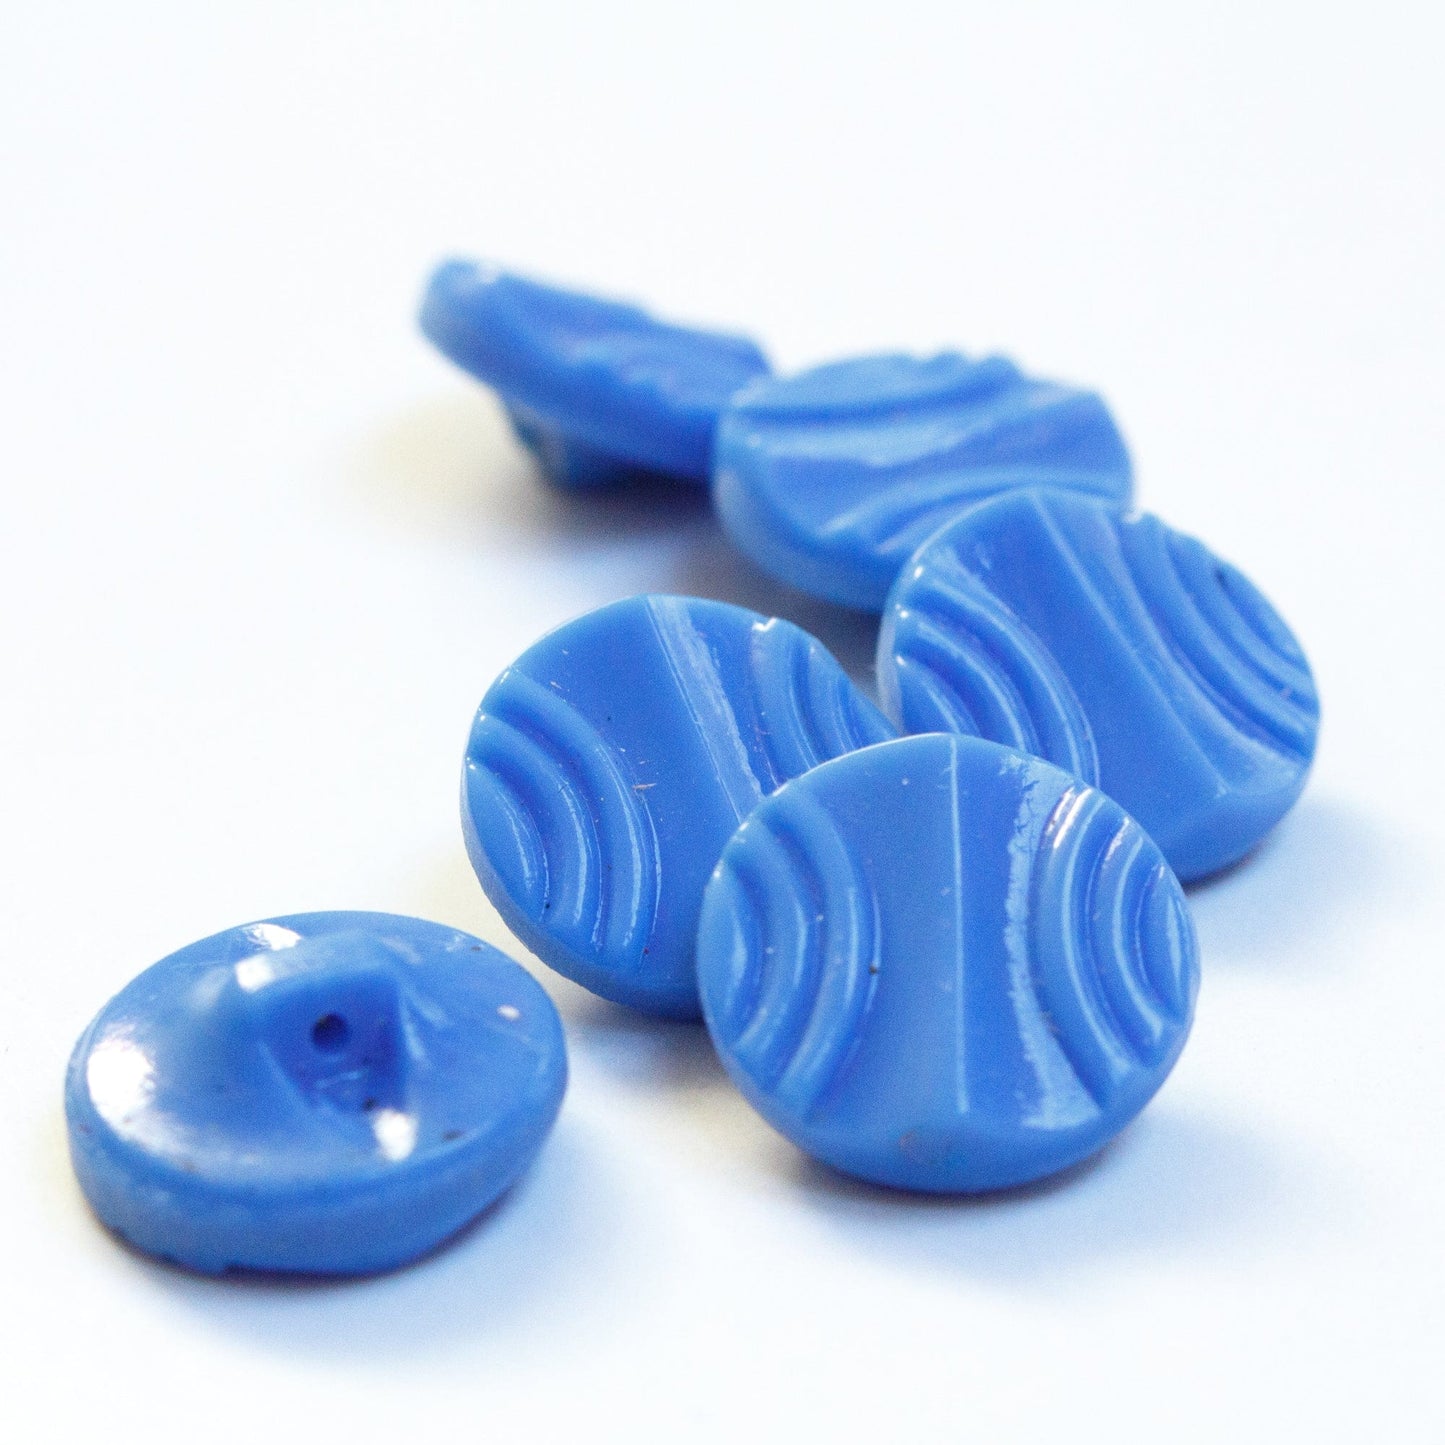 6 Vintage Glass Art Deco Buttons with Shank in Blue - 14mm